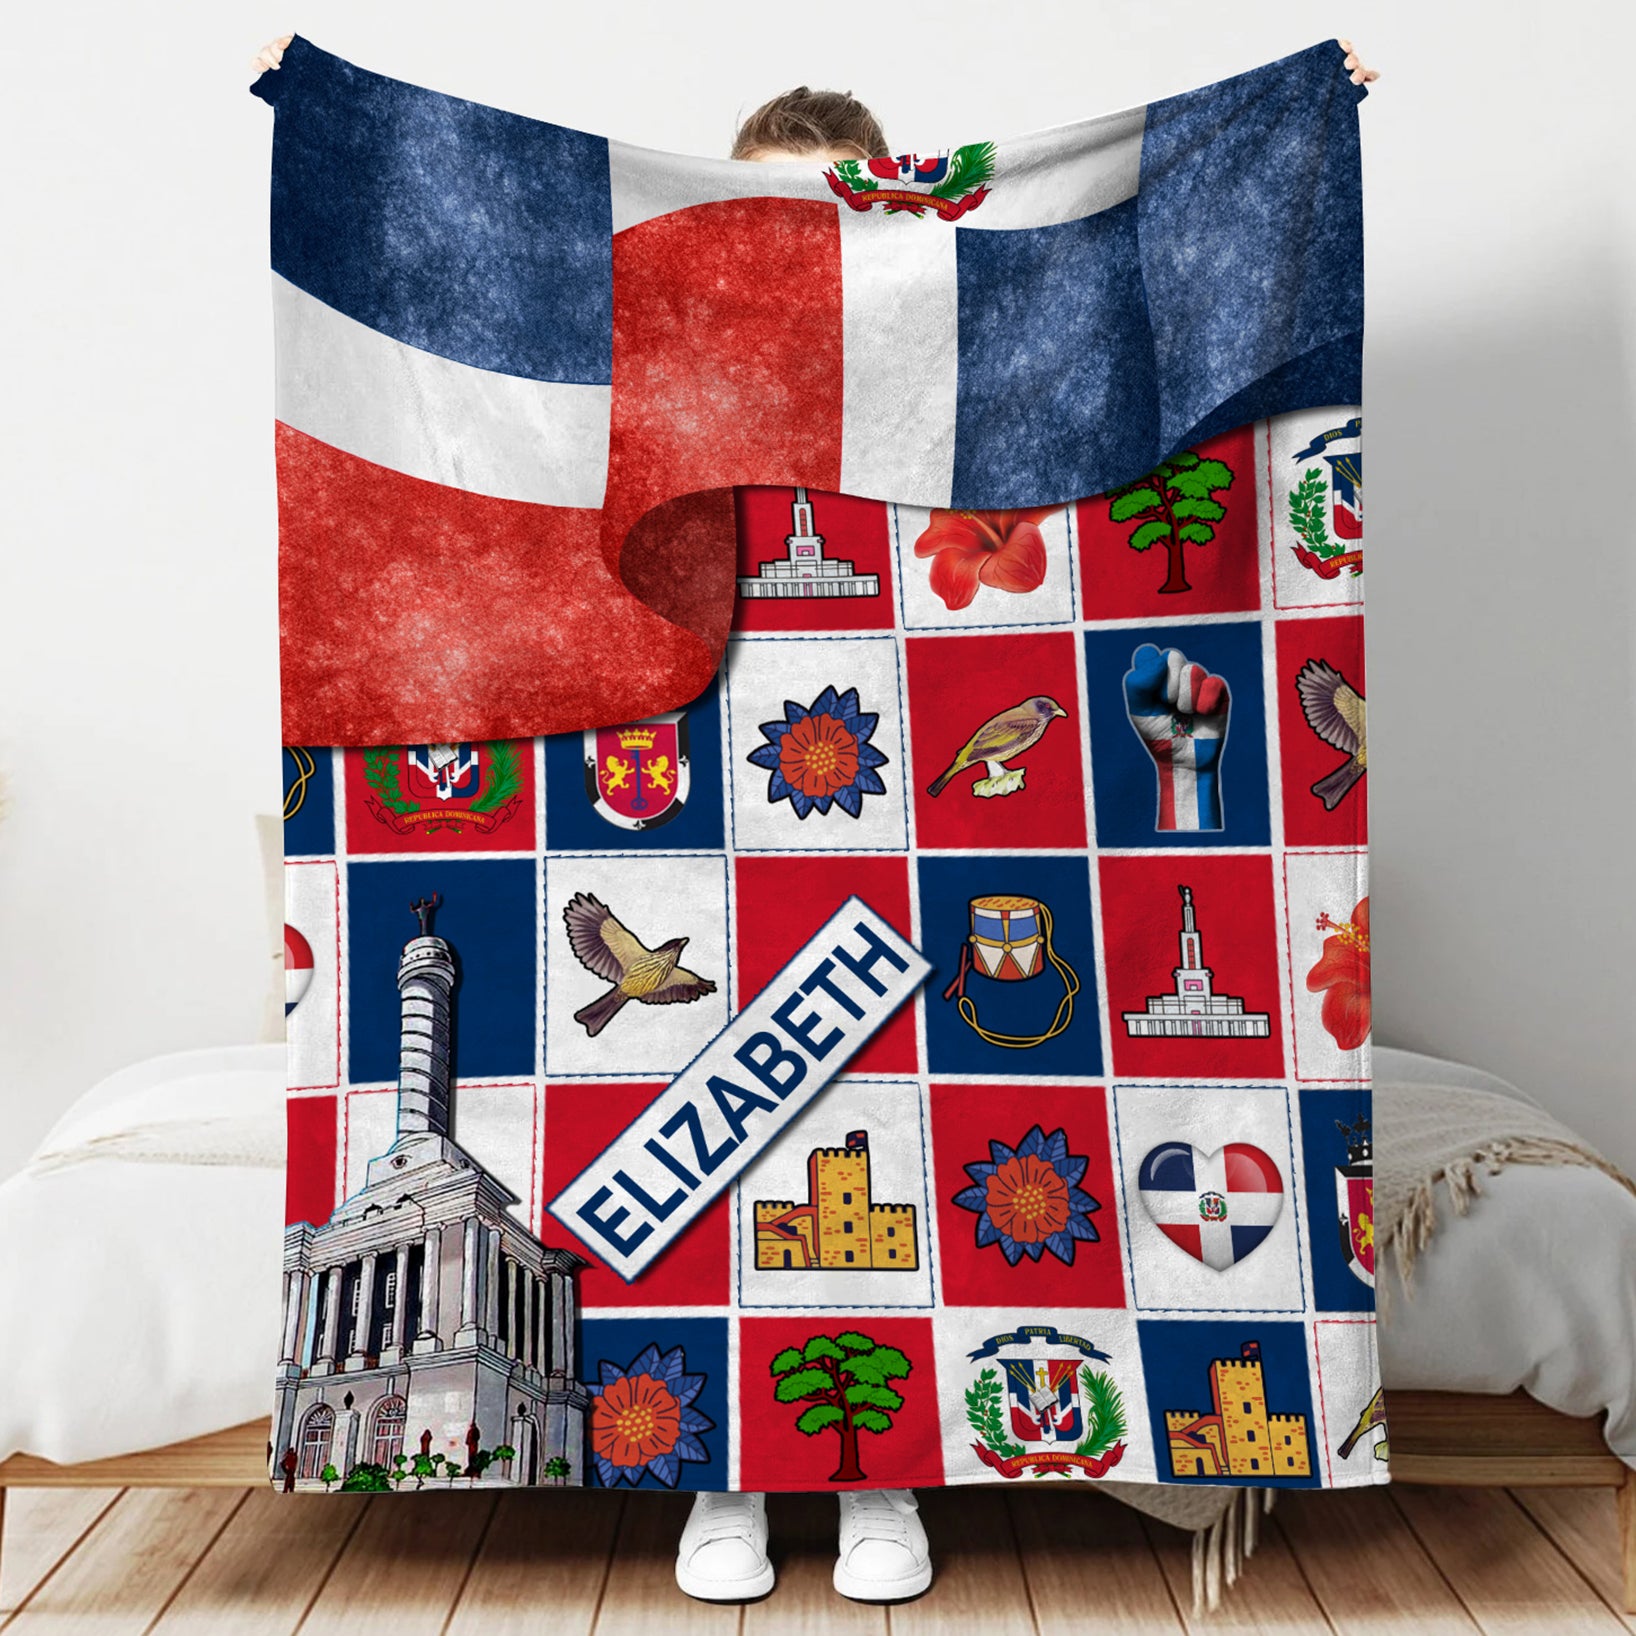 Dominican Personalized Blanket With Dominican Symbols